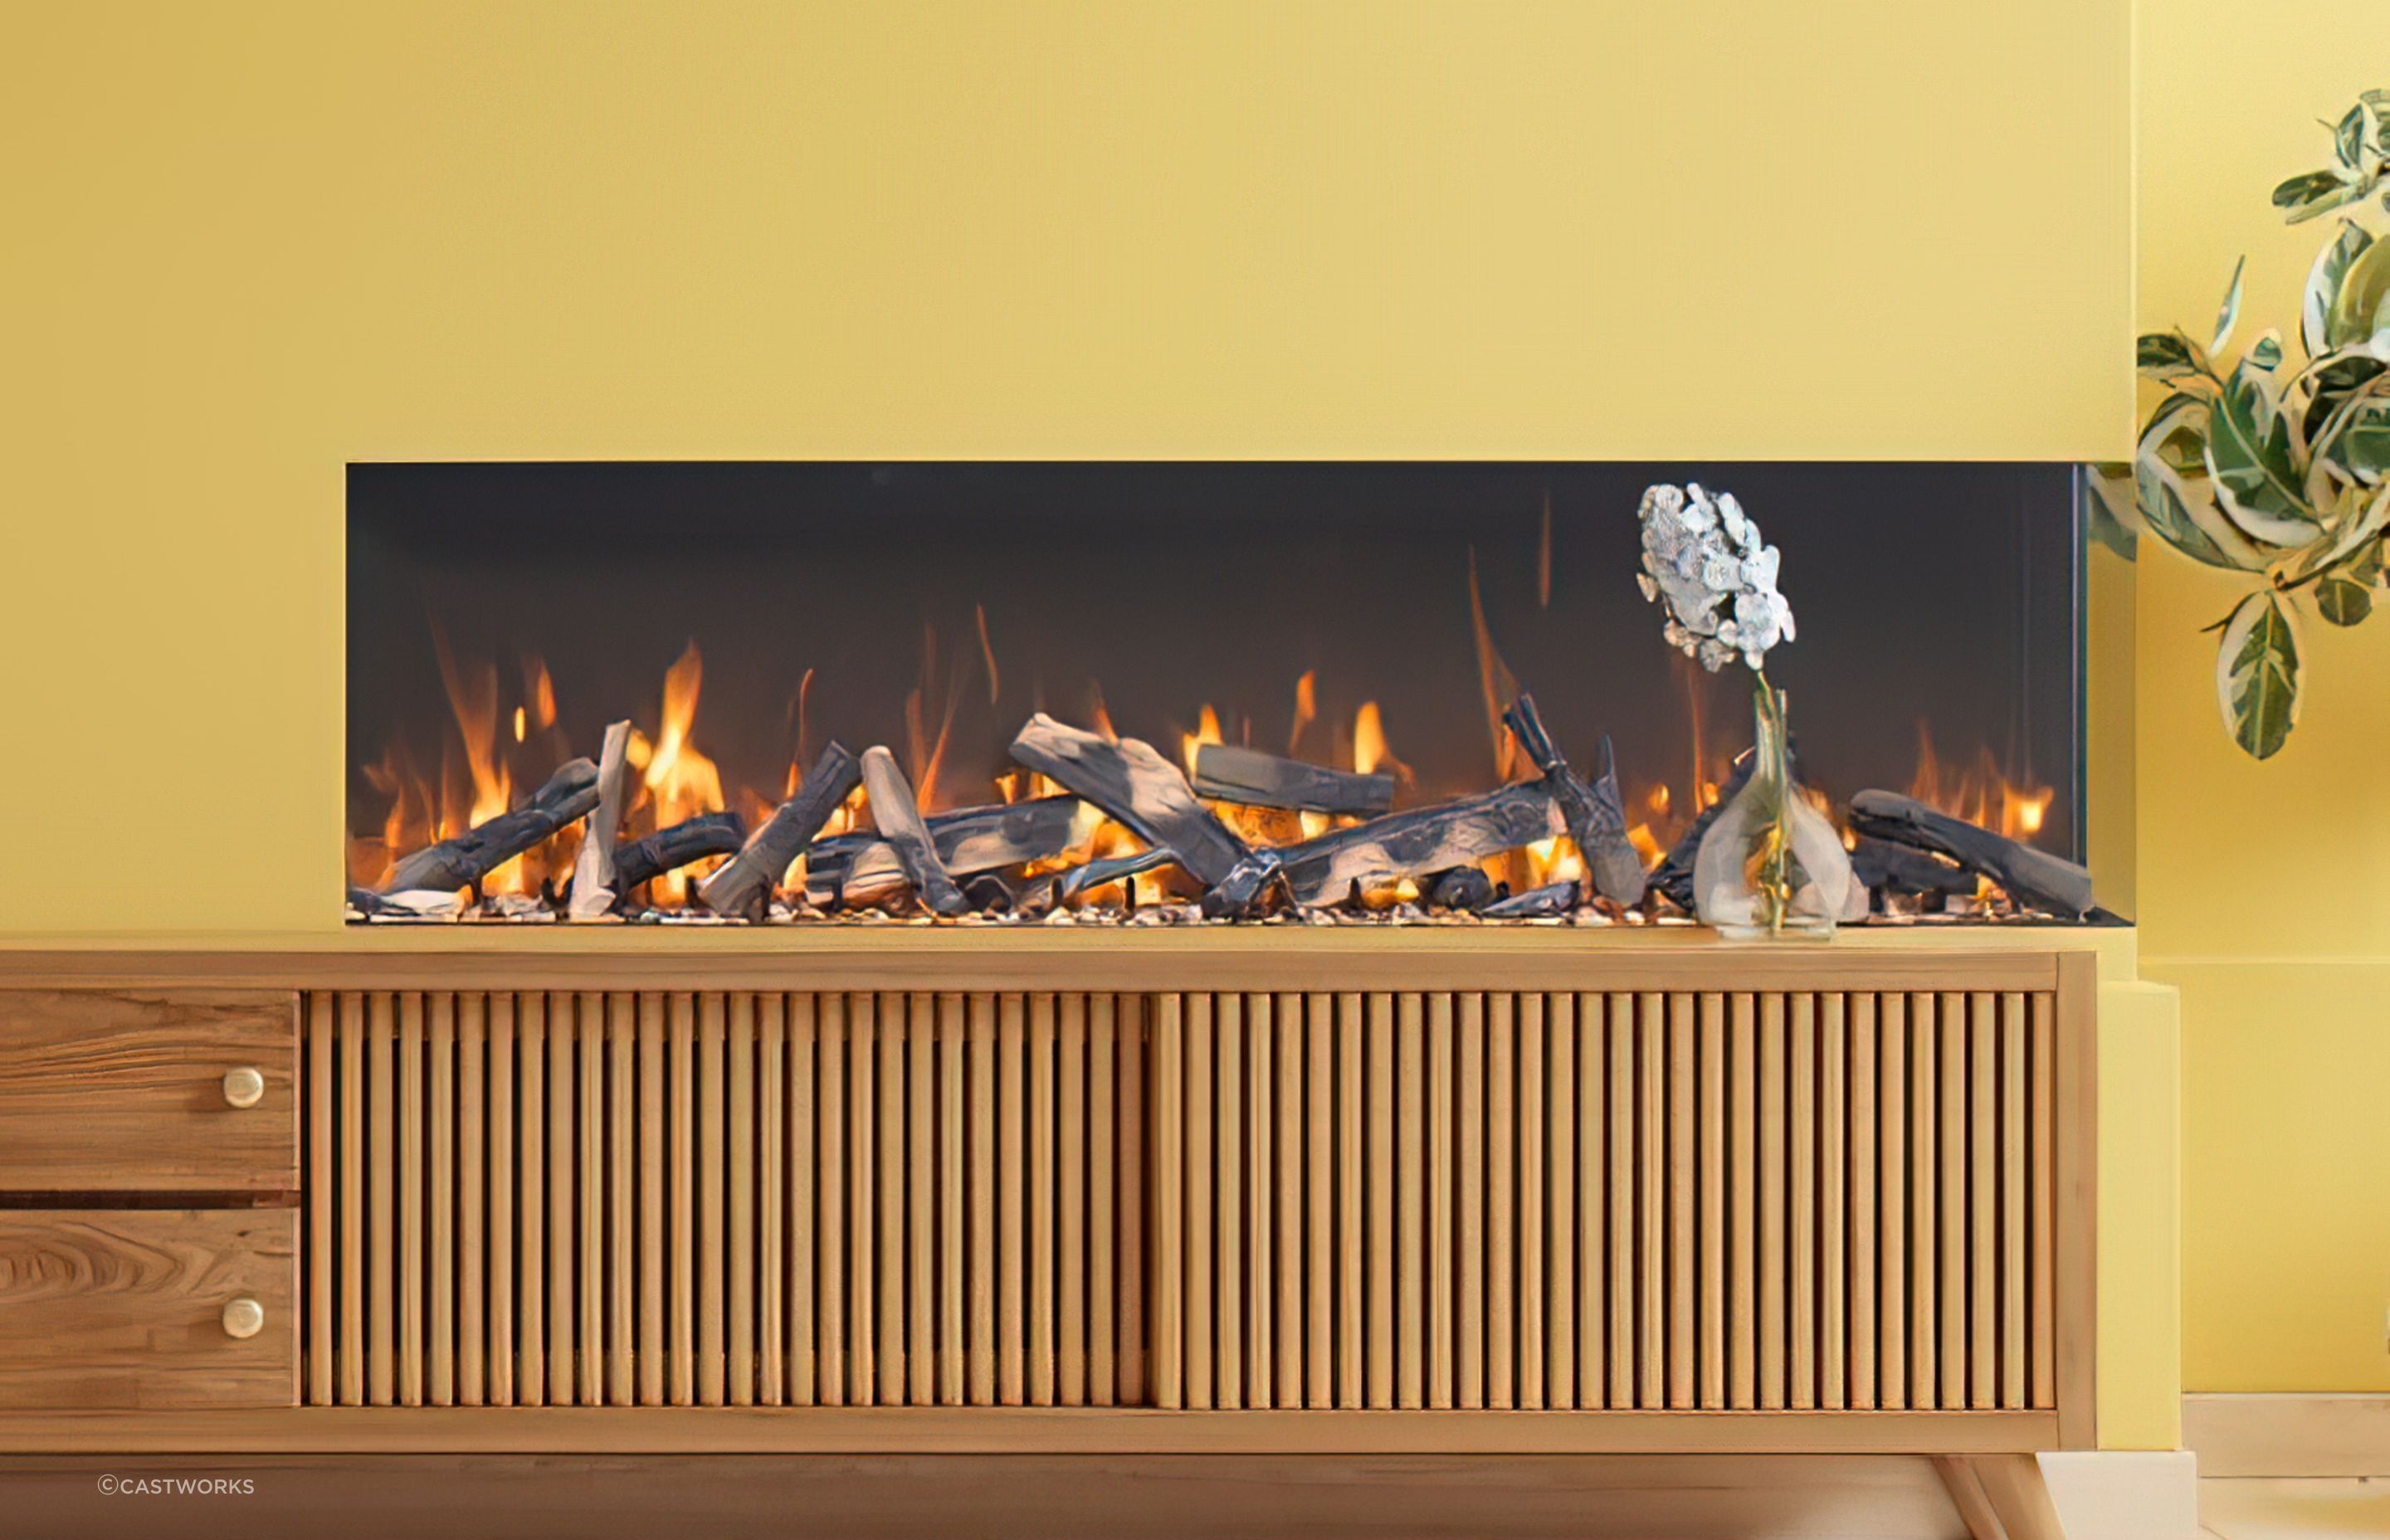 The Amantii Tru View Bespoke 65 Electric Fireplace is great alternative to a traditional wood-burning option.